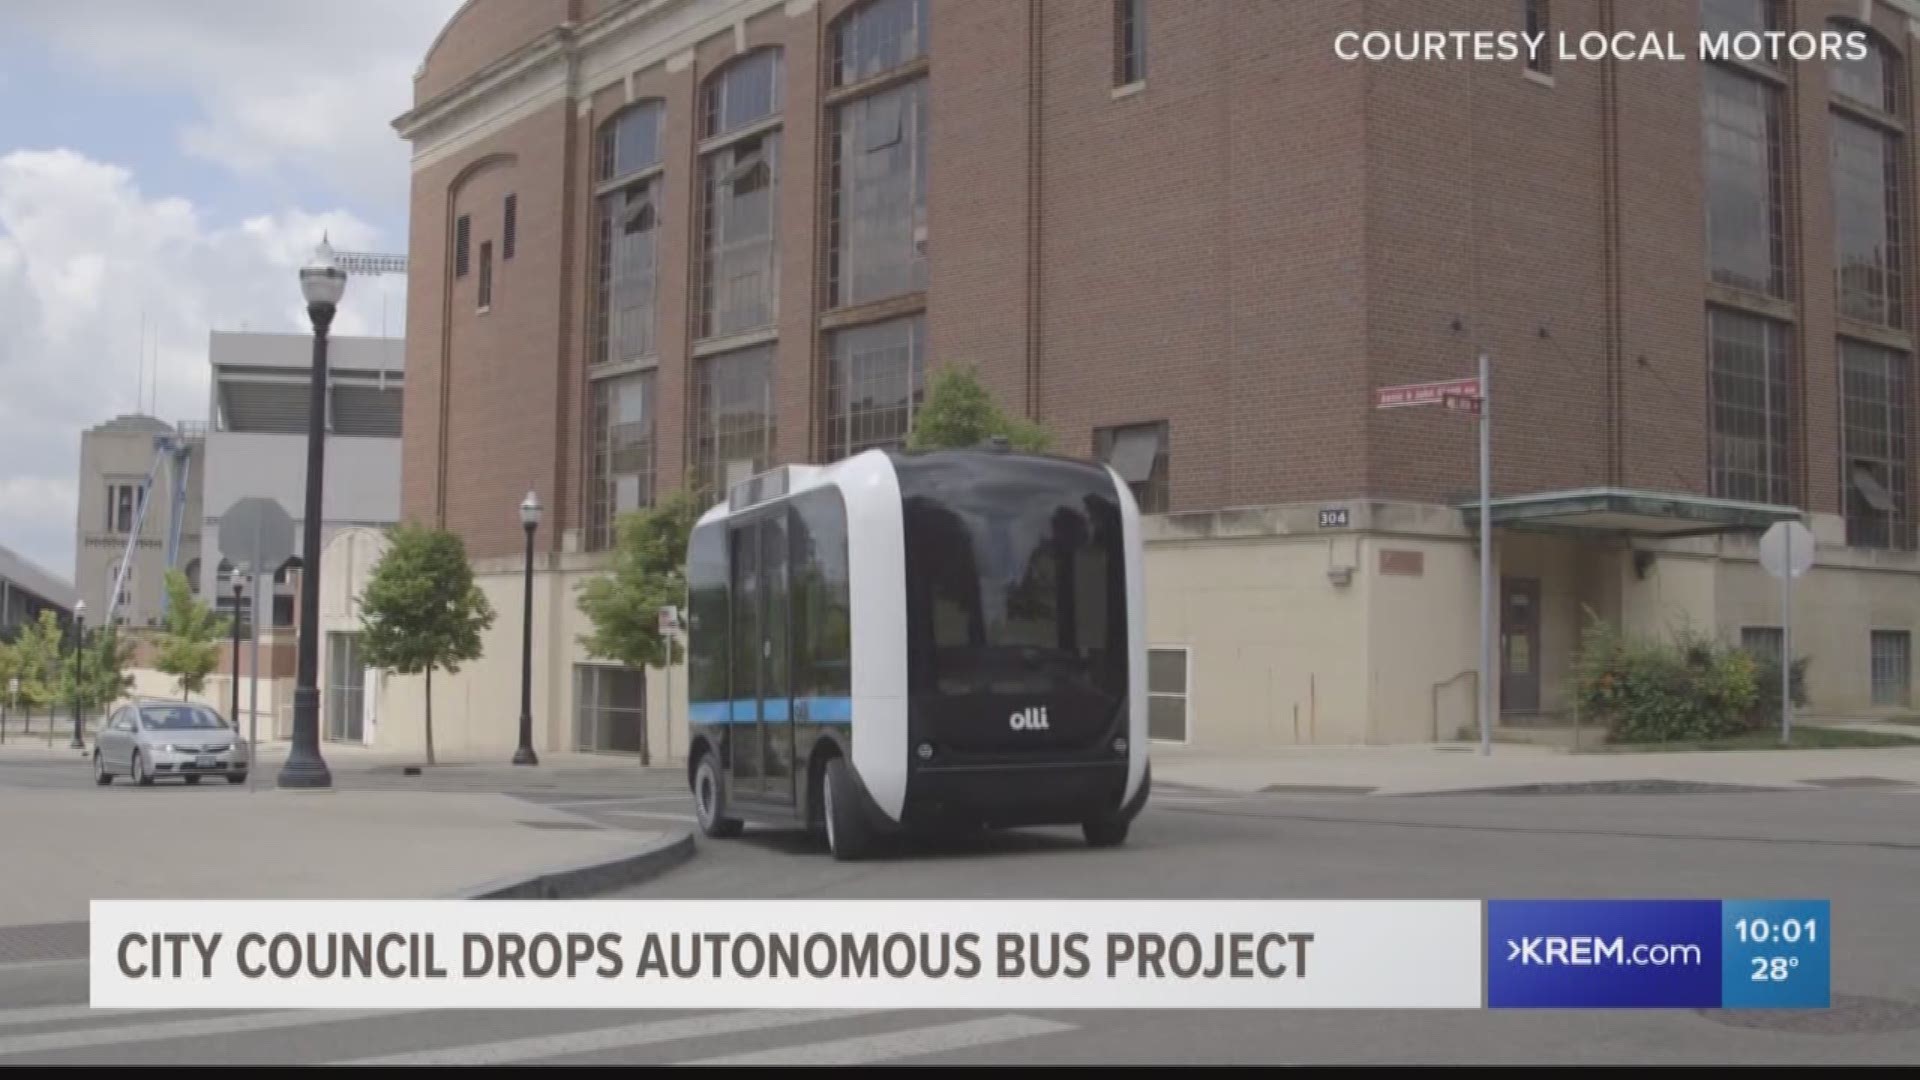 Spokane City Council surprised many by voting against a proposal to pilot a self-driving bus attraction.